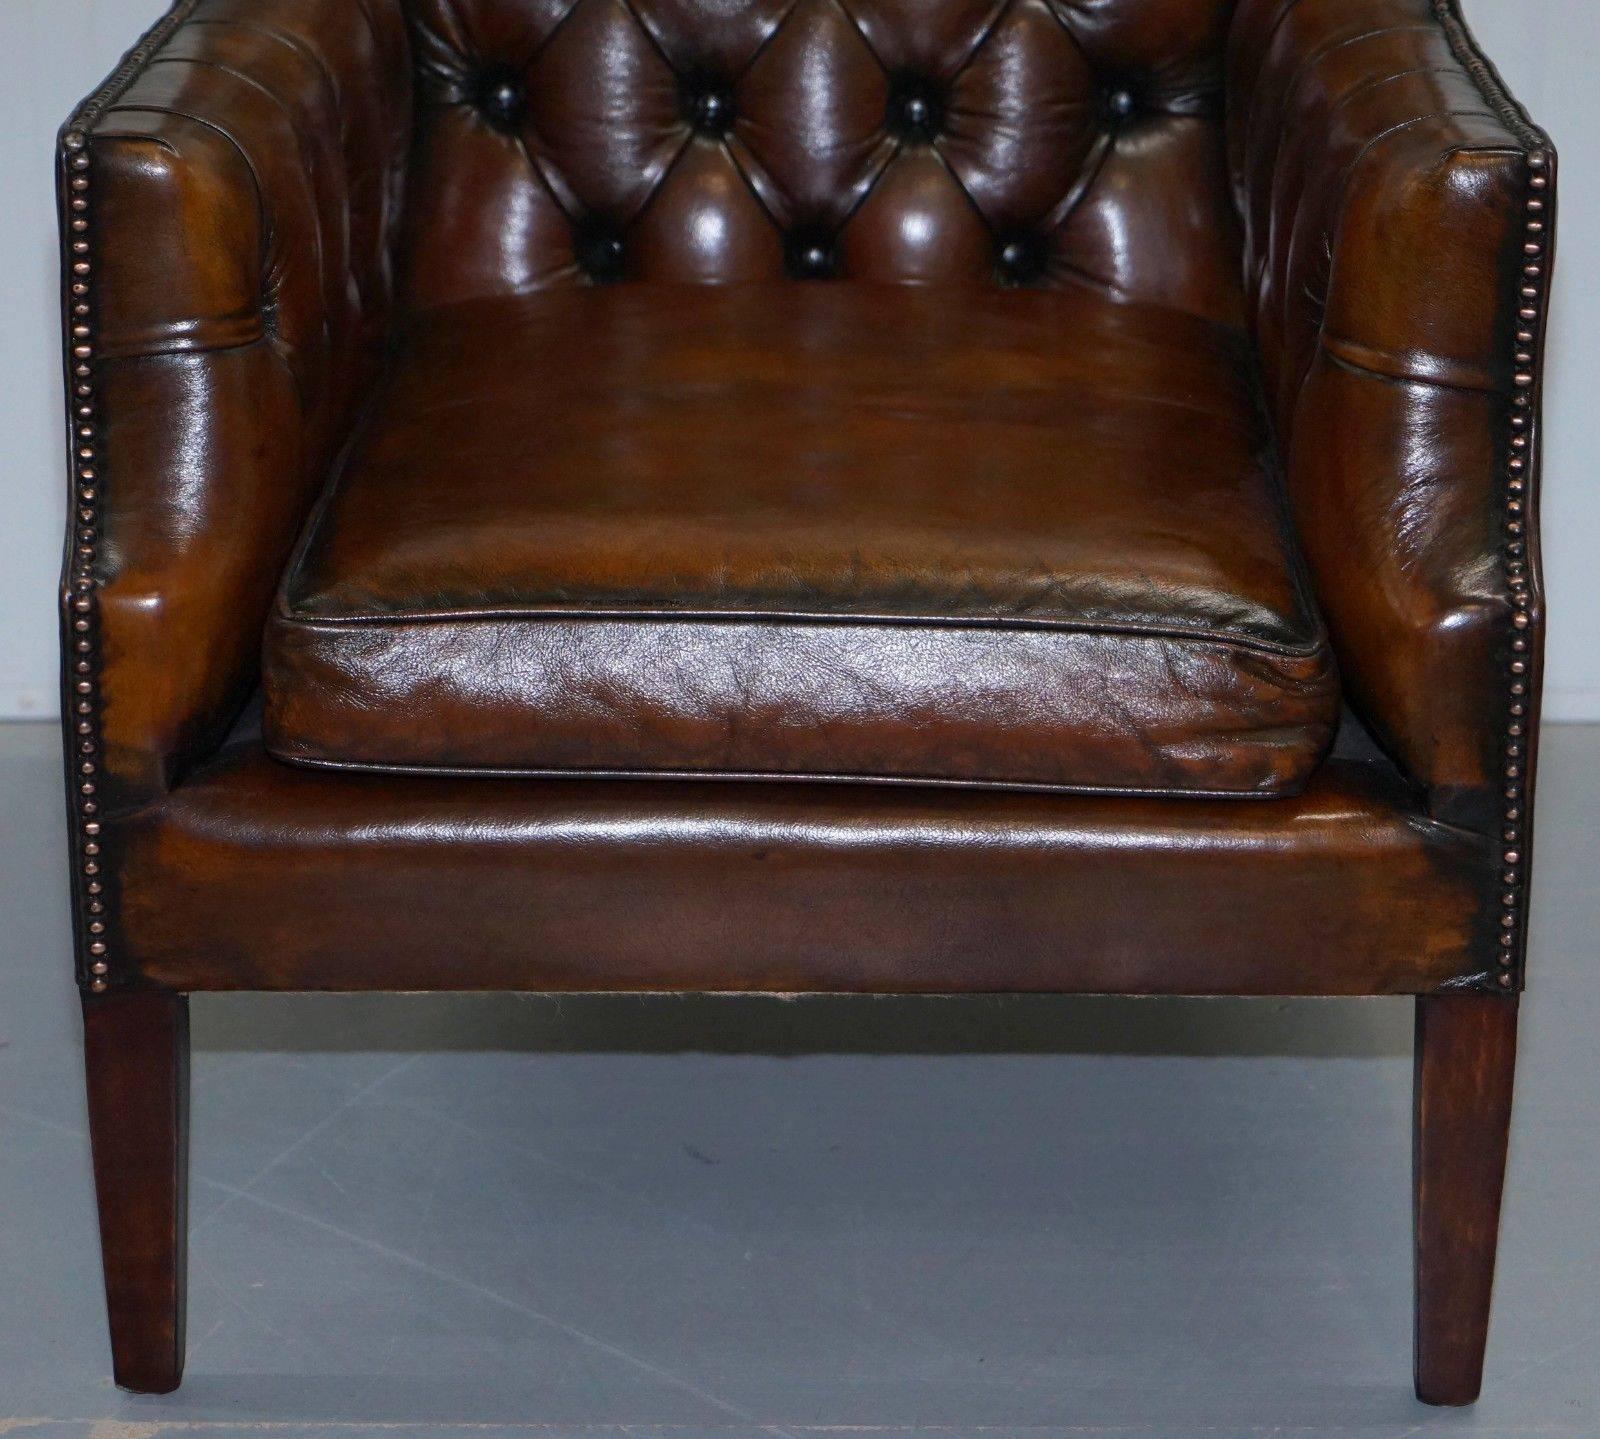 Hand-Carved Pair of George Smith Chesterfield Armchairs in Brown Leather